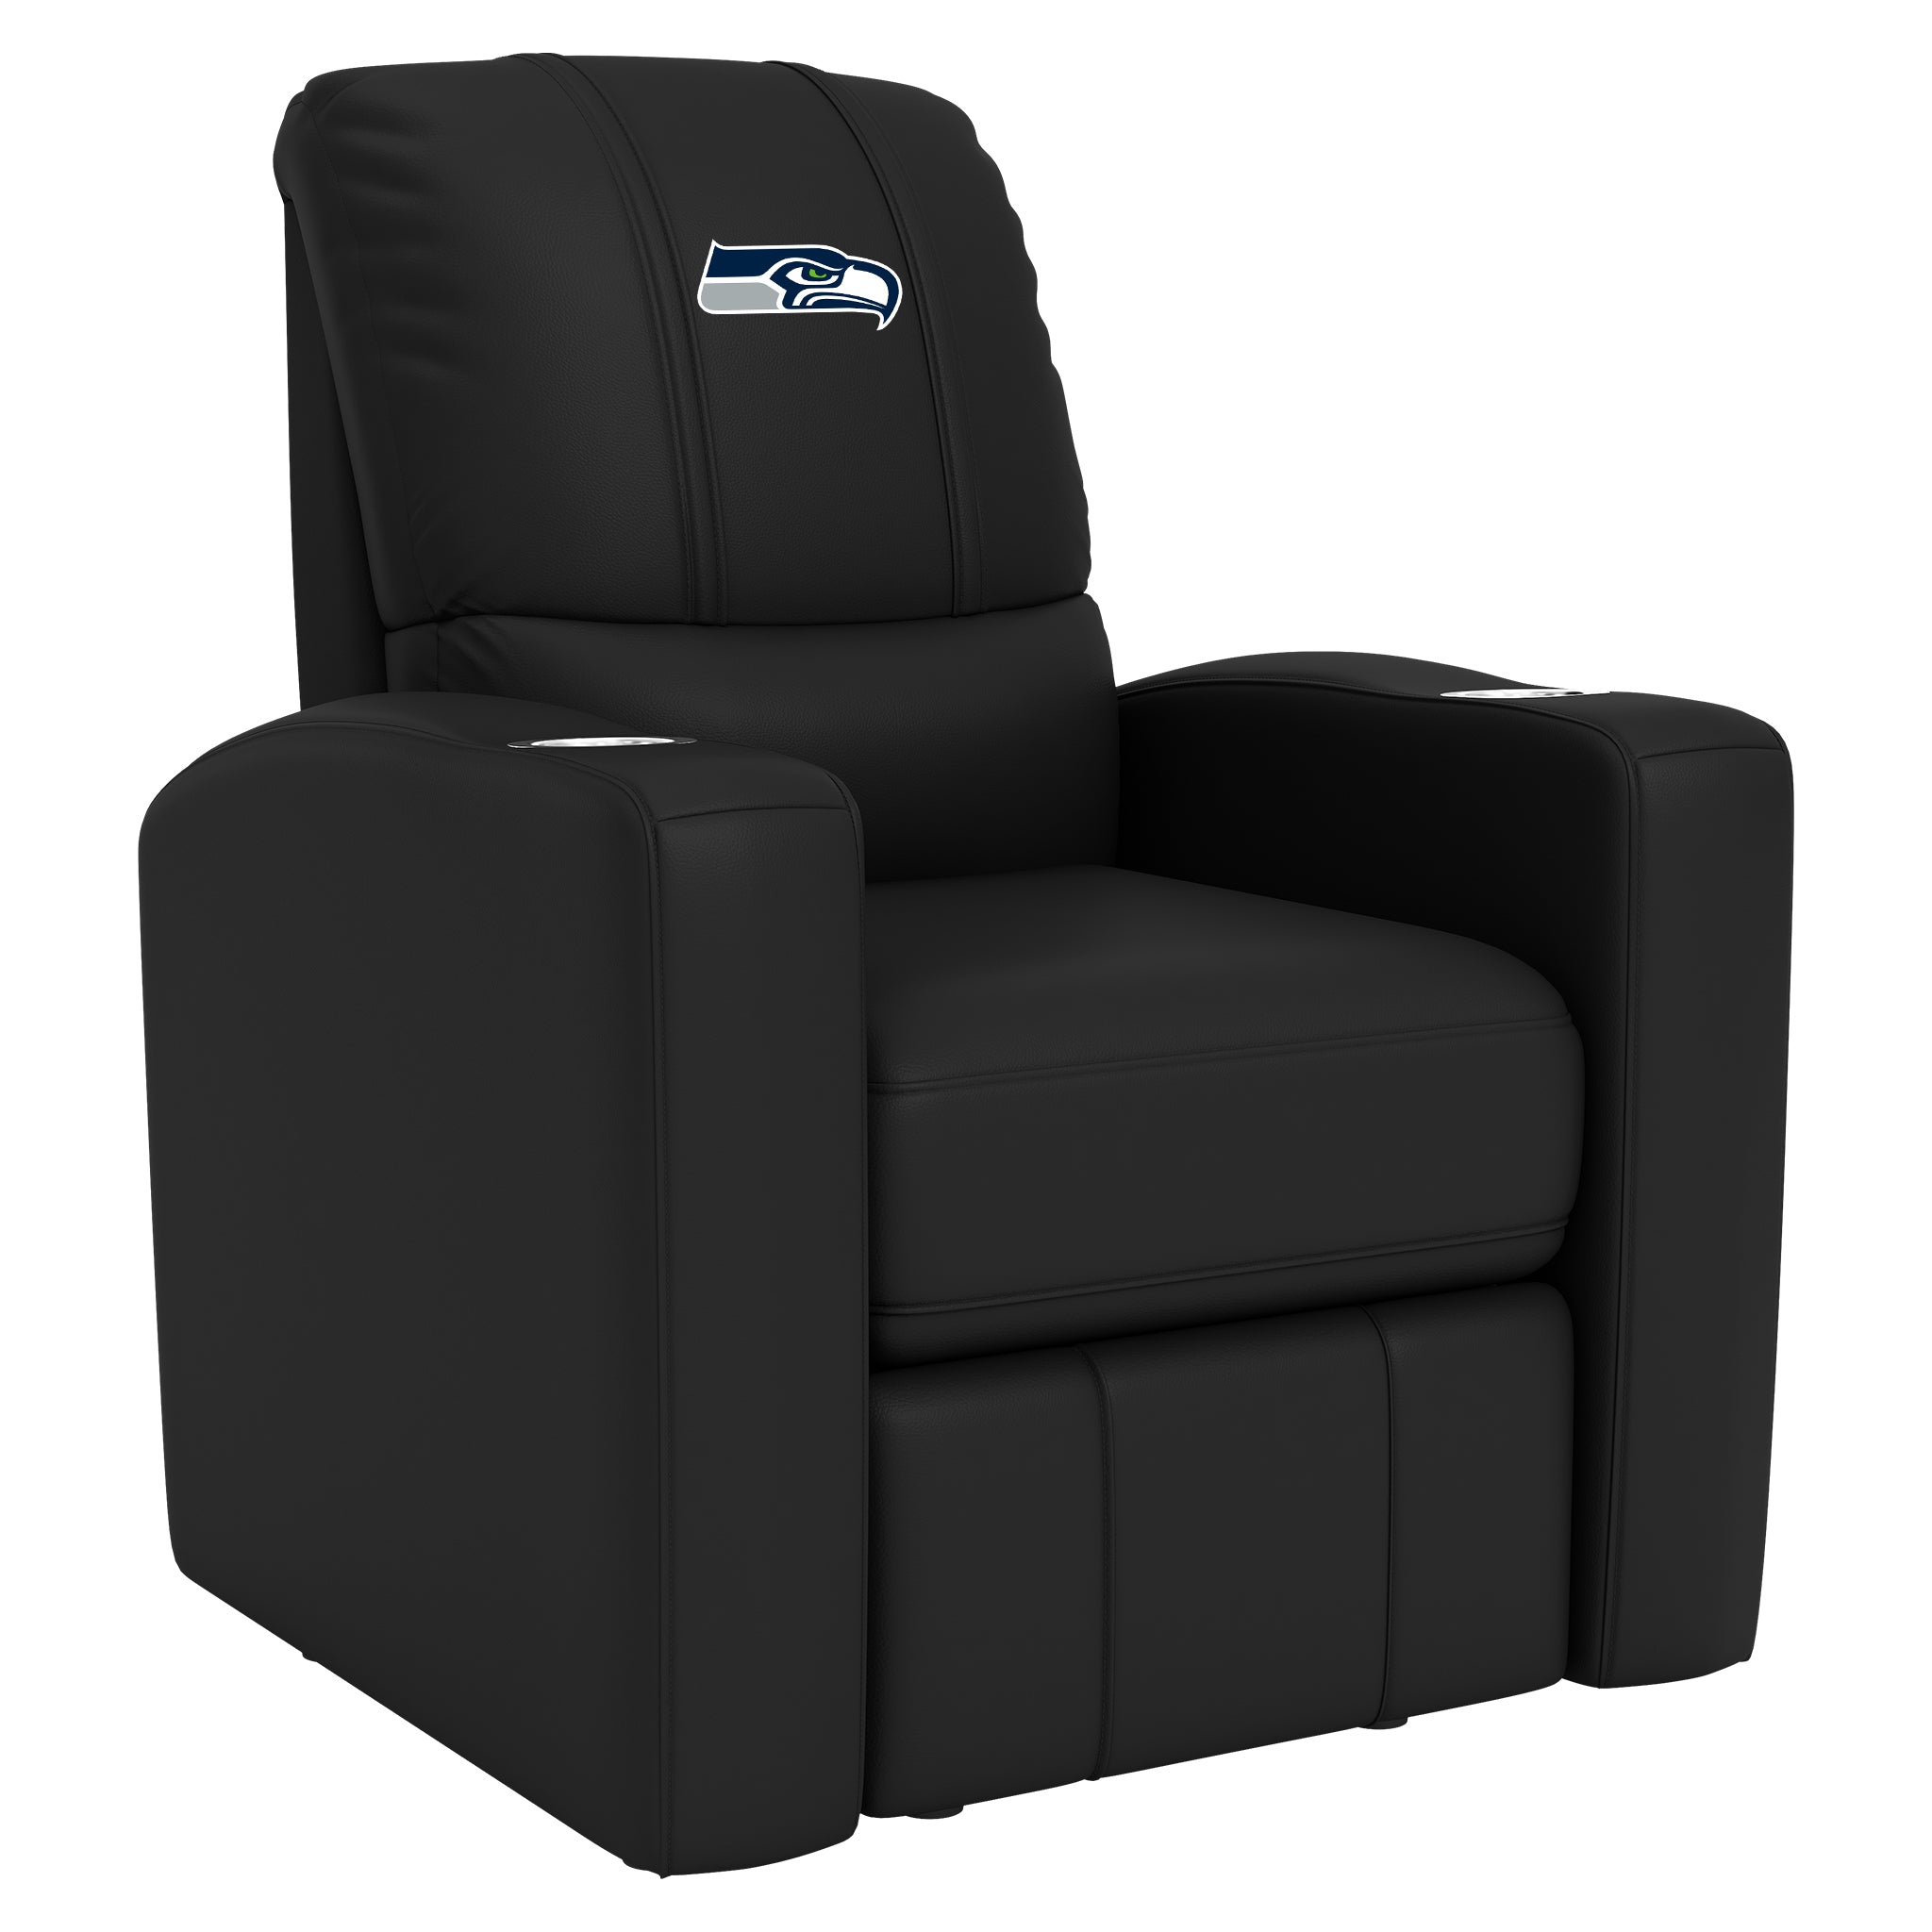 Seattle Seahawks Stealth Recliner Manual